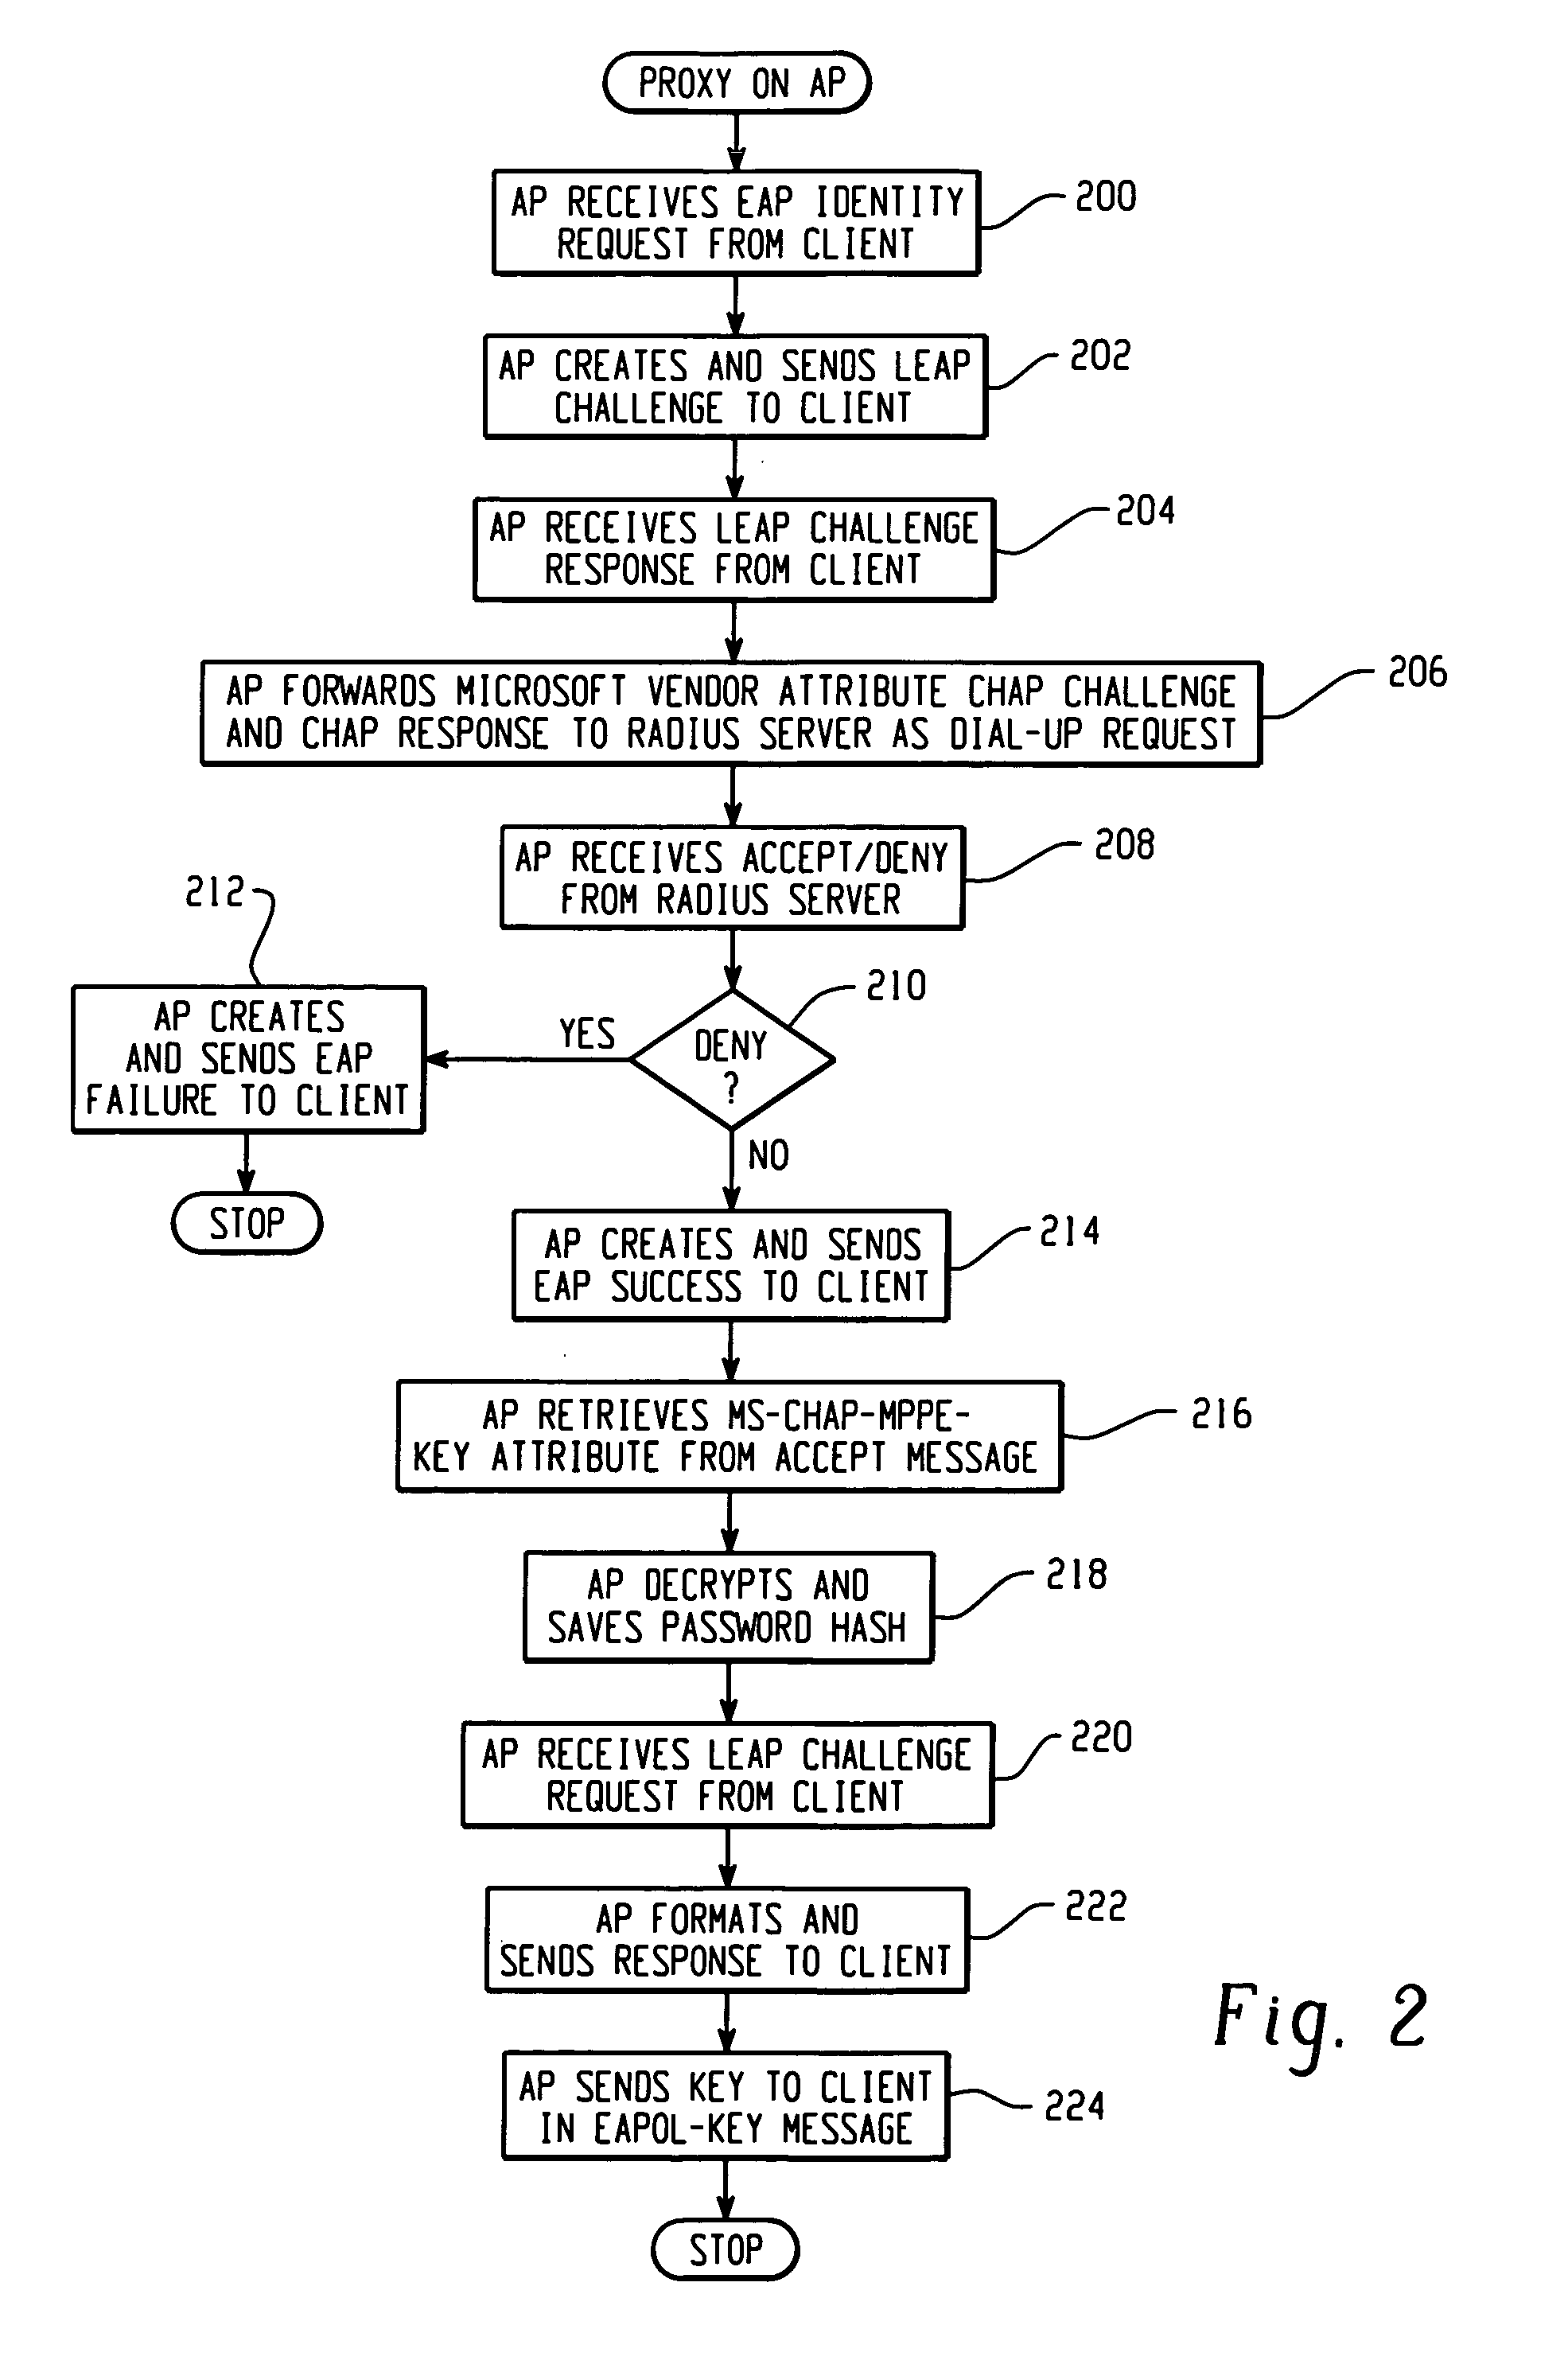 System and method of controlling access by a wireless client to a network that utilizes a challenge/handshake authentication protocol